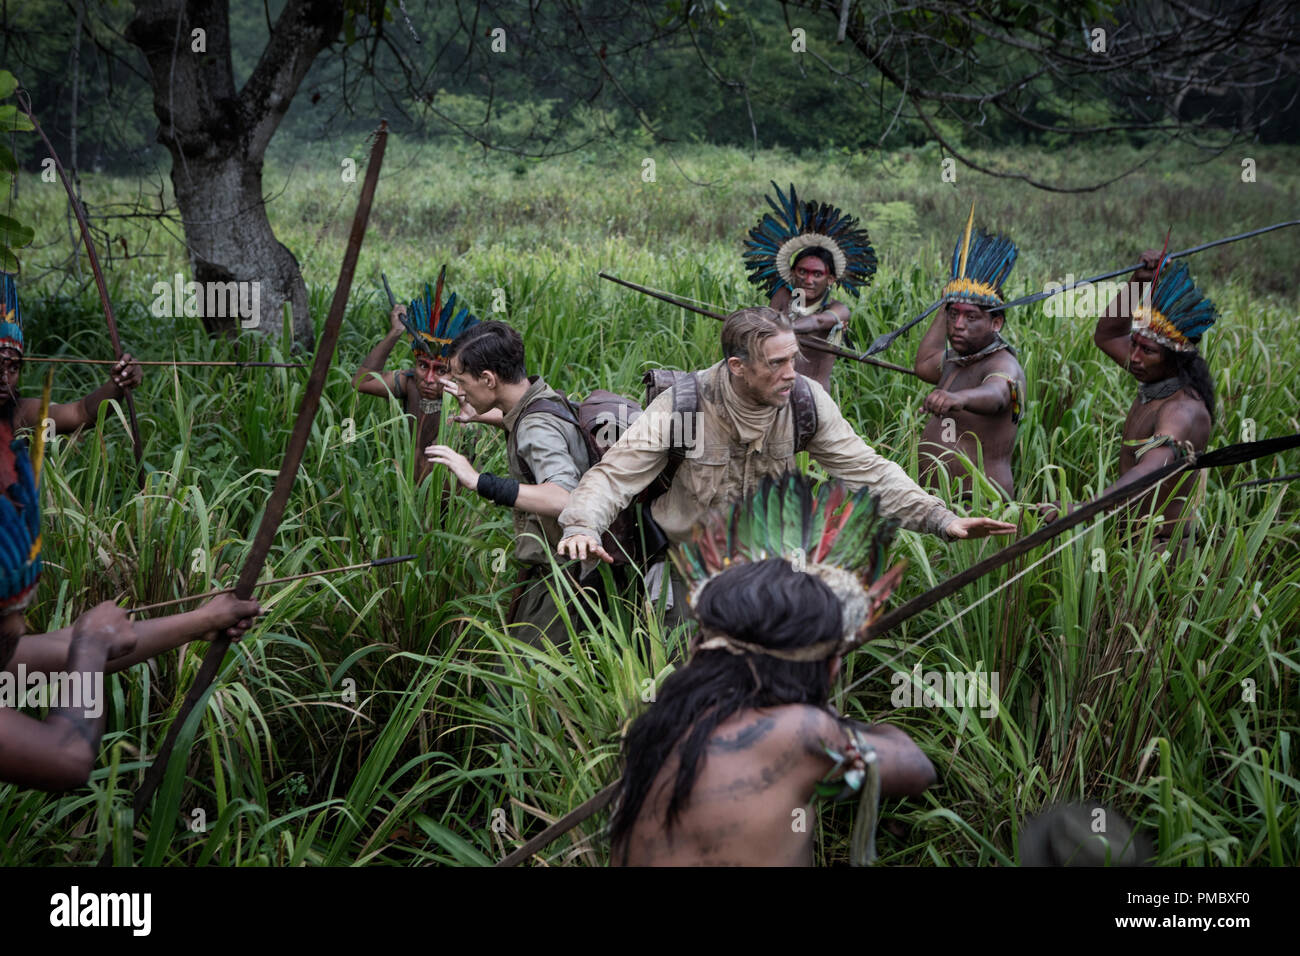 Tom Holland (center, left) stars as Jack Fawcett and Charlie Hunnam (center, right) stars as Percy Fawcett in director James Gray's THE LOST CITY OF Z, an Amazon Studios and Bleecker Street release. (2017) Stock Photo